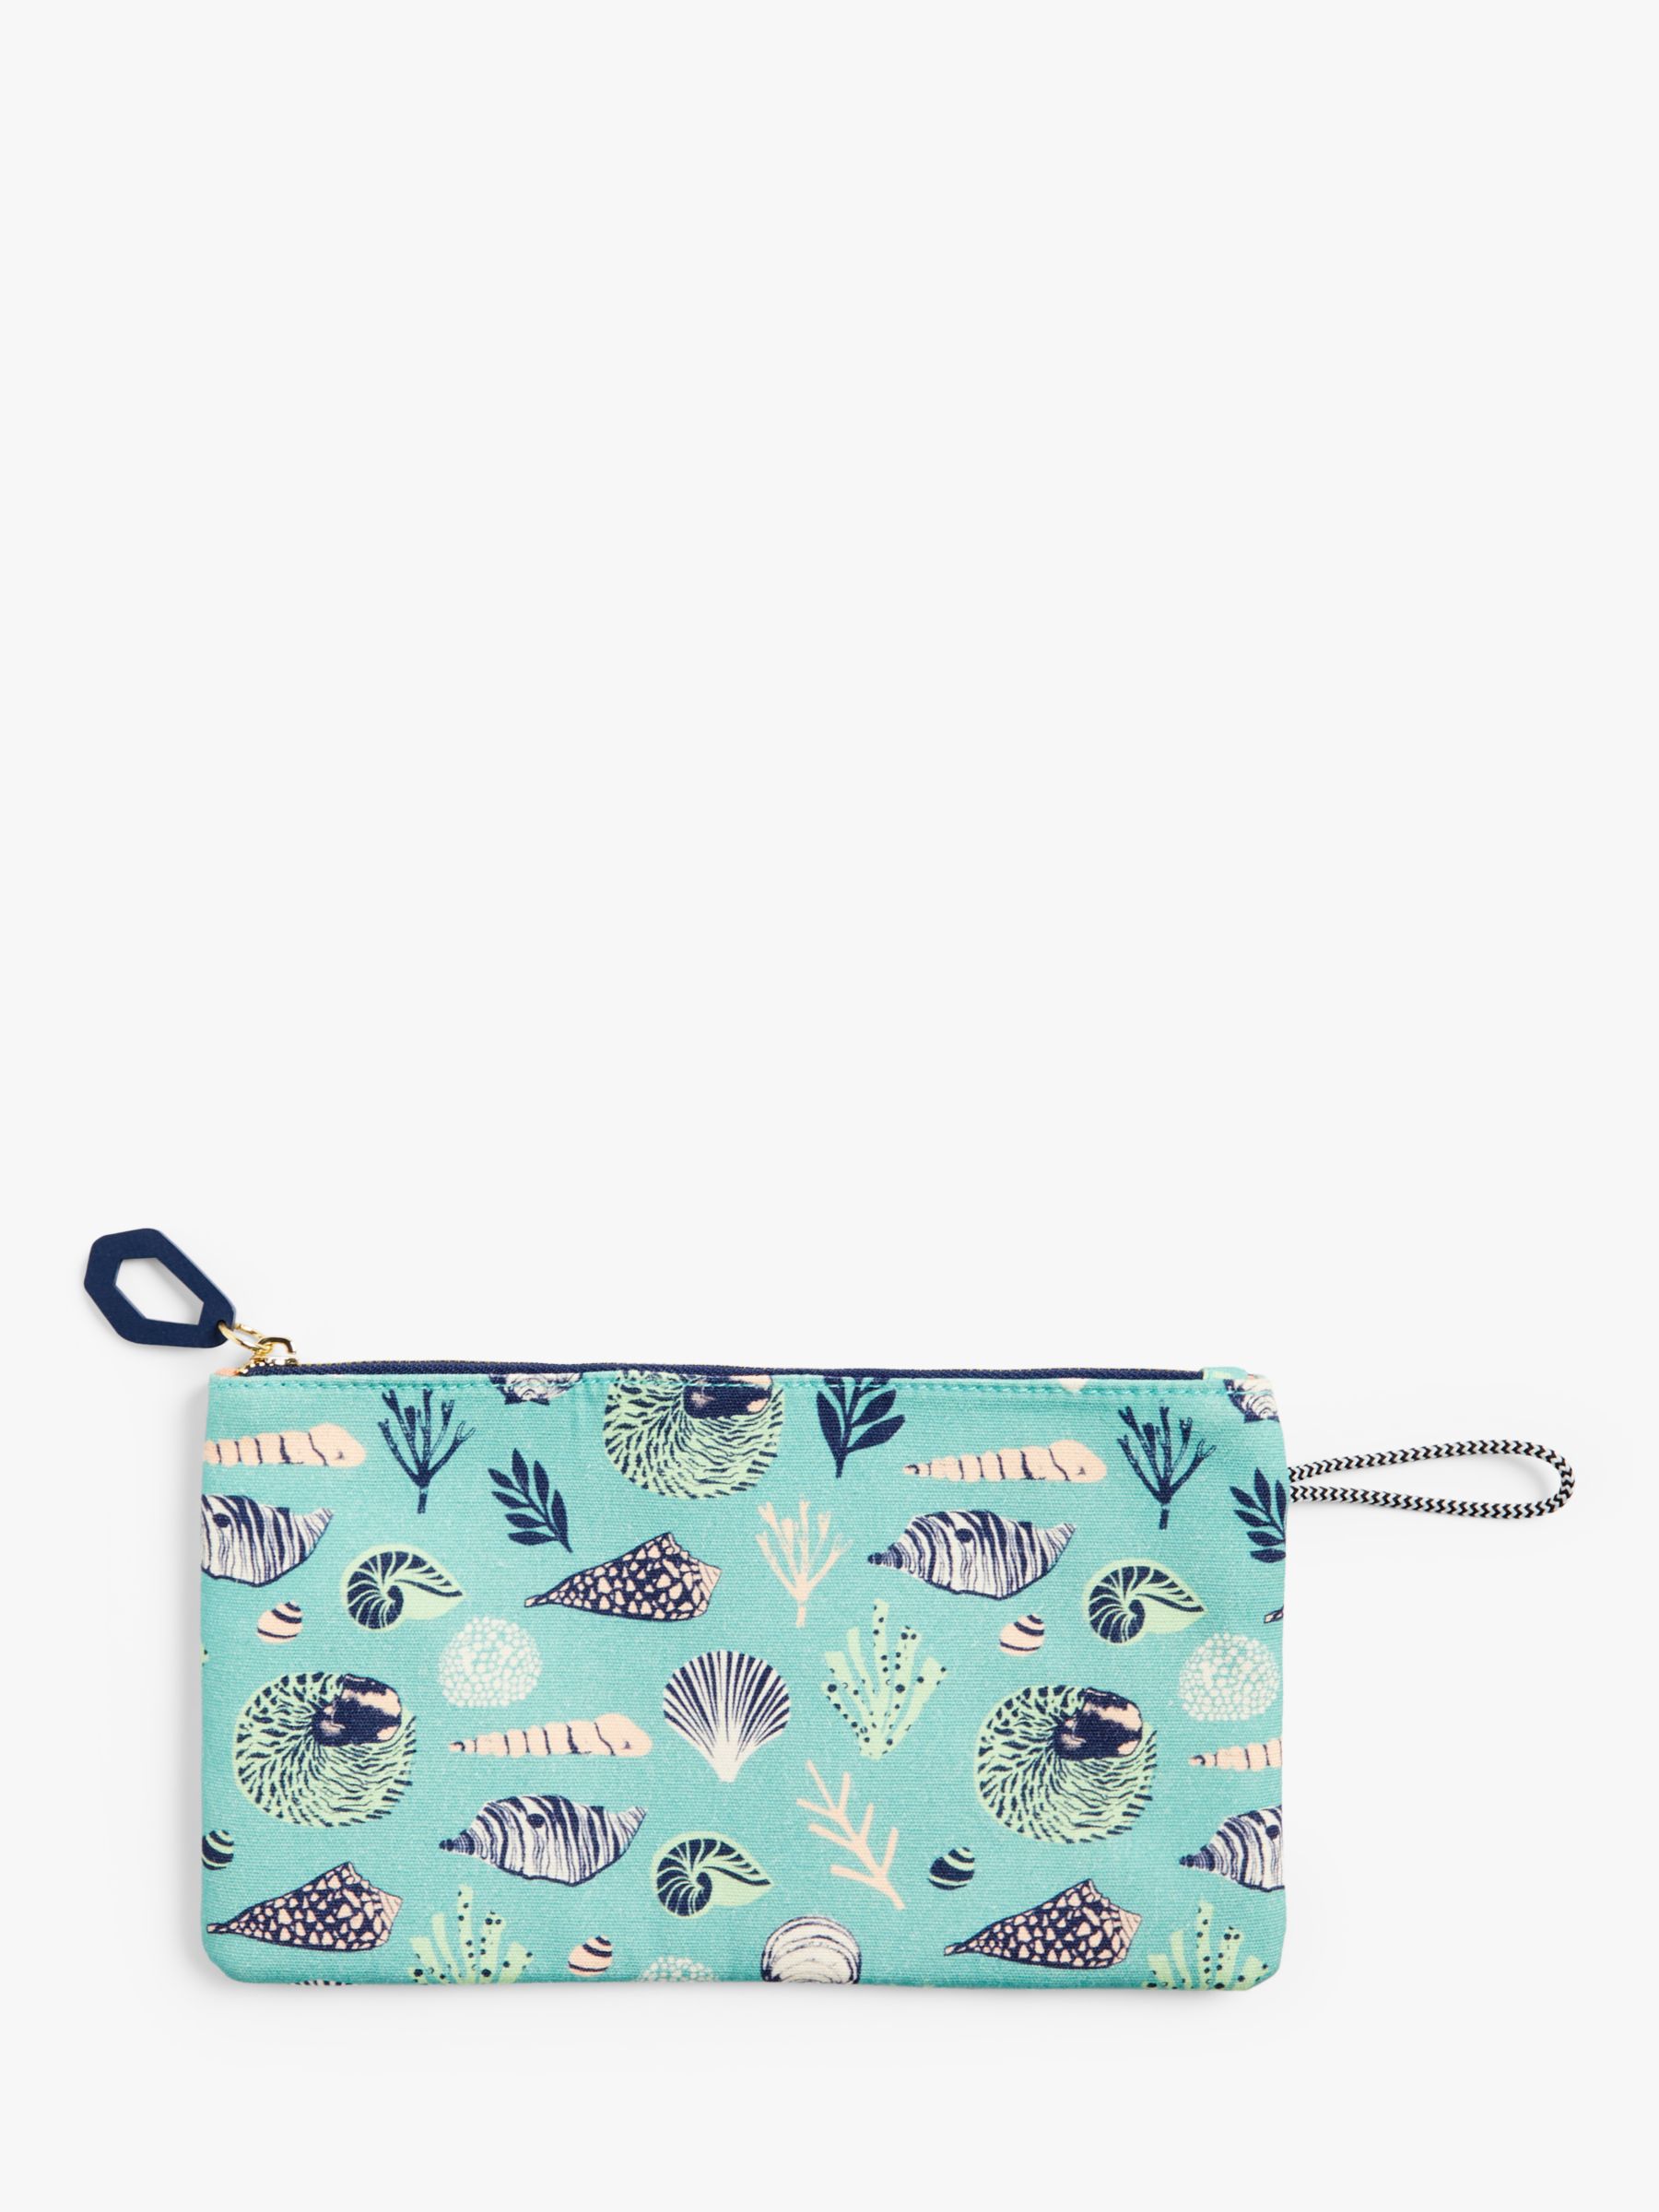 Pencil Cases | Stationery | John Lewis & Partners